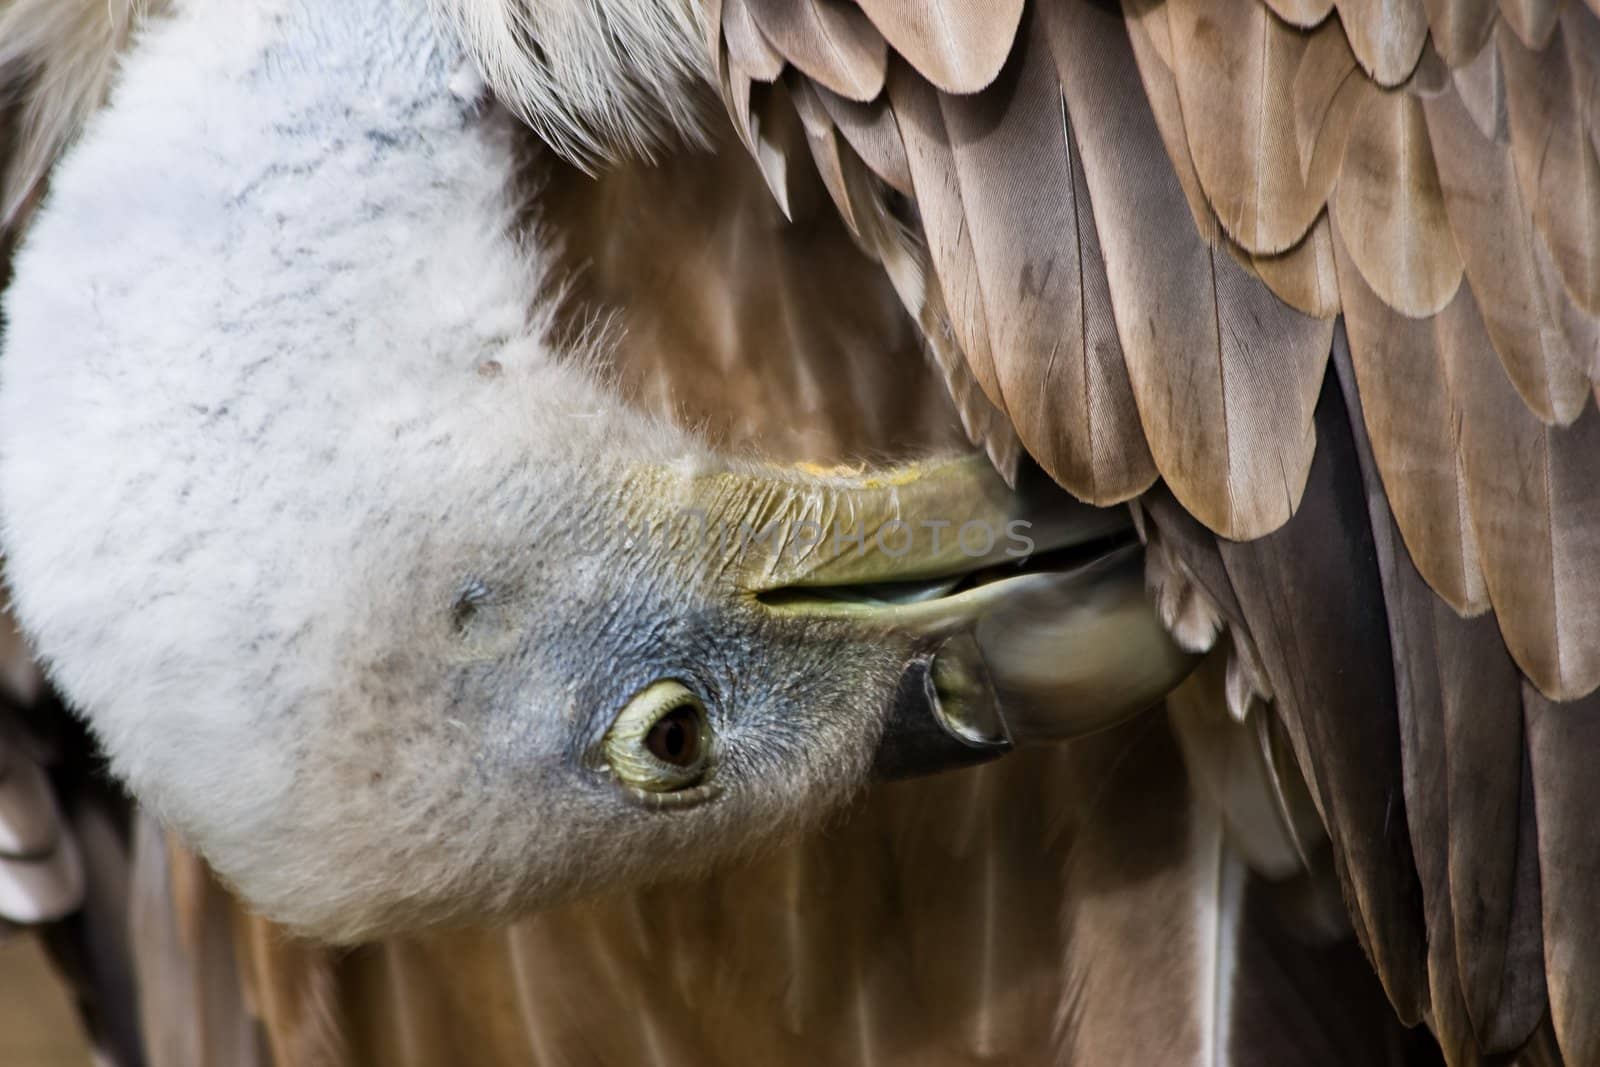 Griffon vulture, with beak between feathers, making toilet